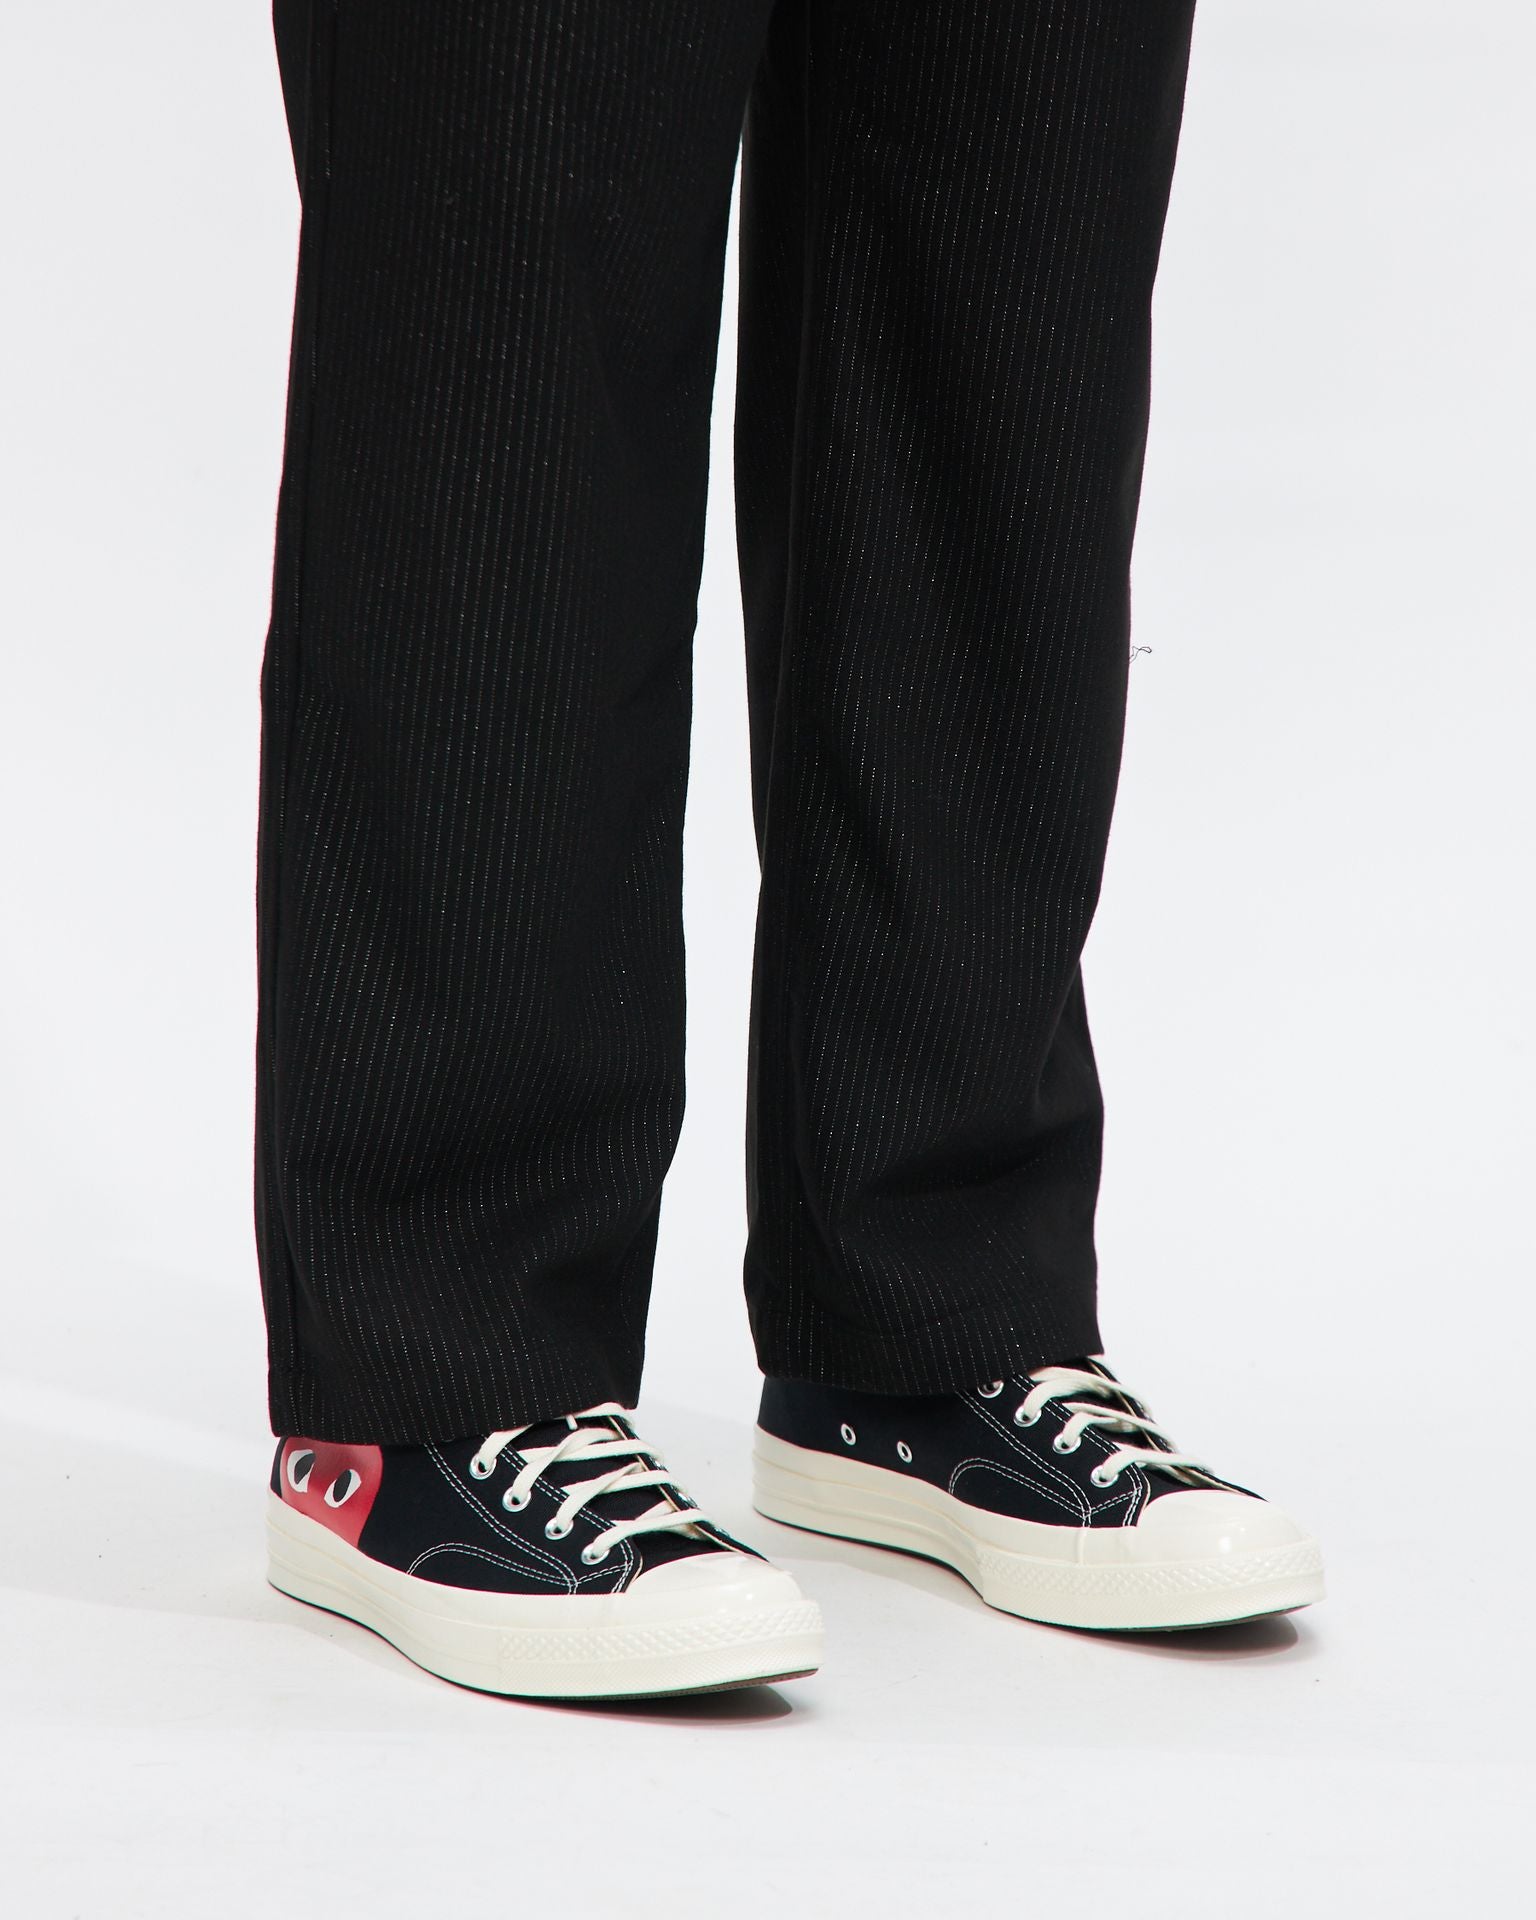 George Suiting Trouser